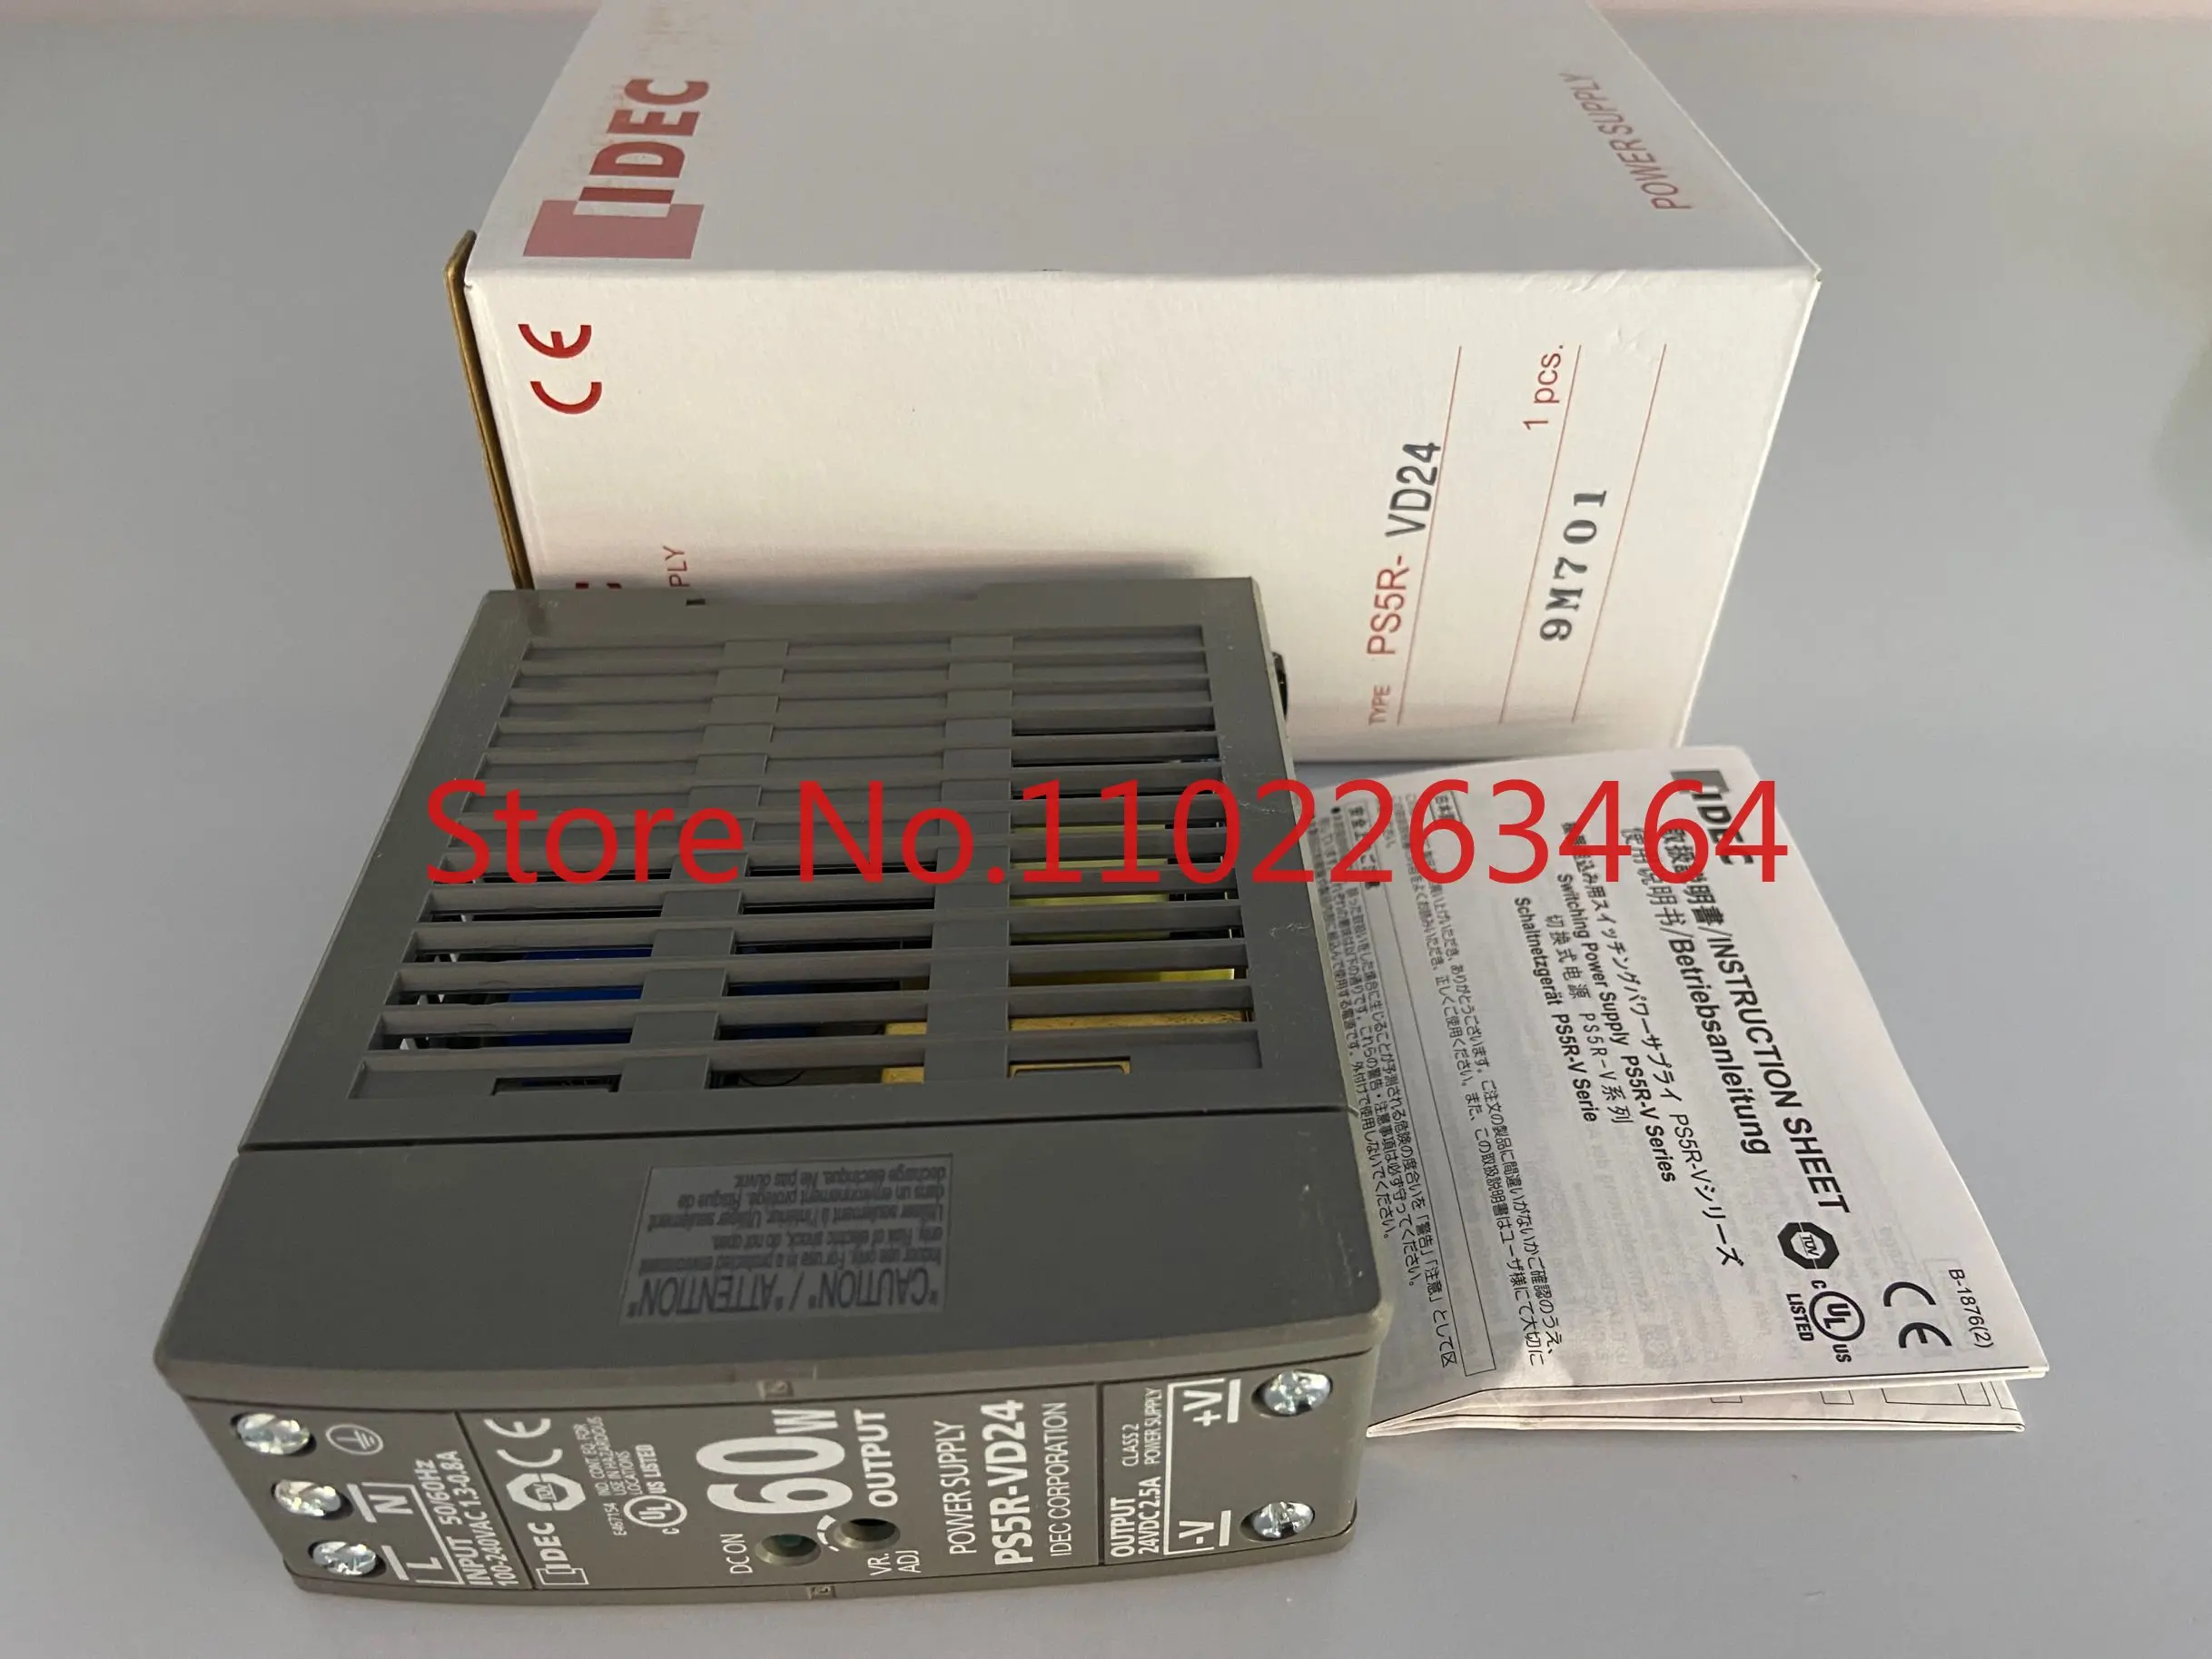 

PS5R-VC24 Japanese idec Hequan PS5R-VD24 VE24 switching power supply VF24 VG24